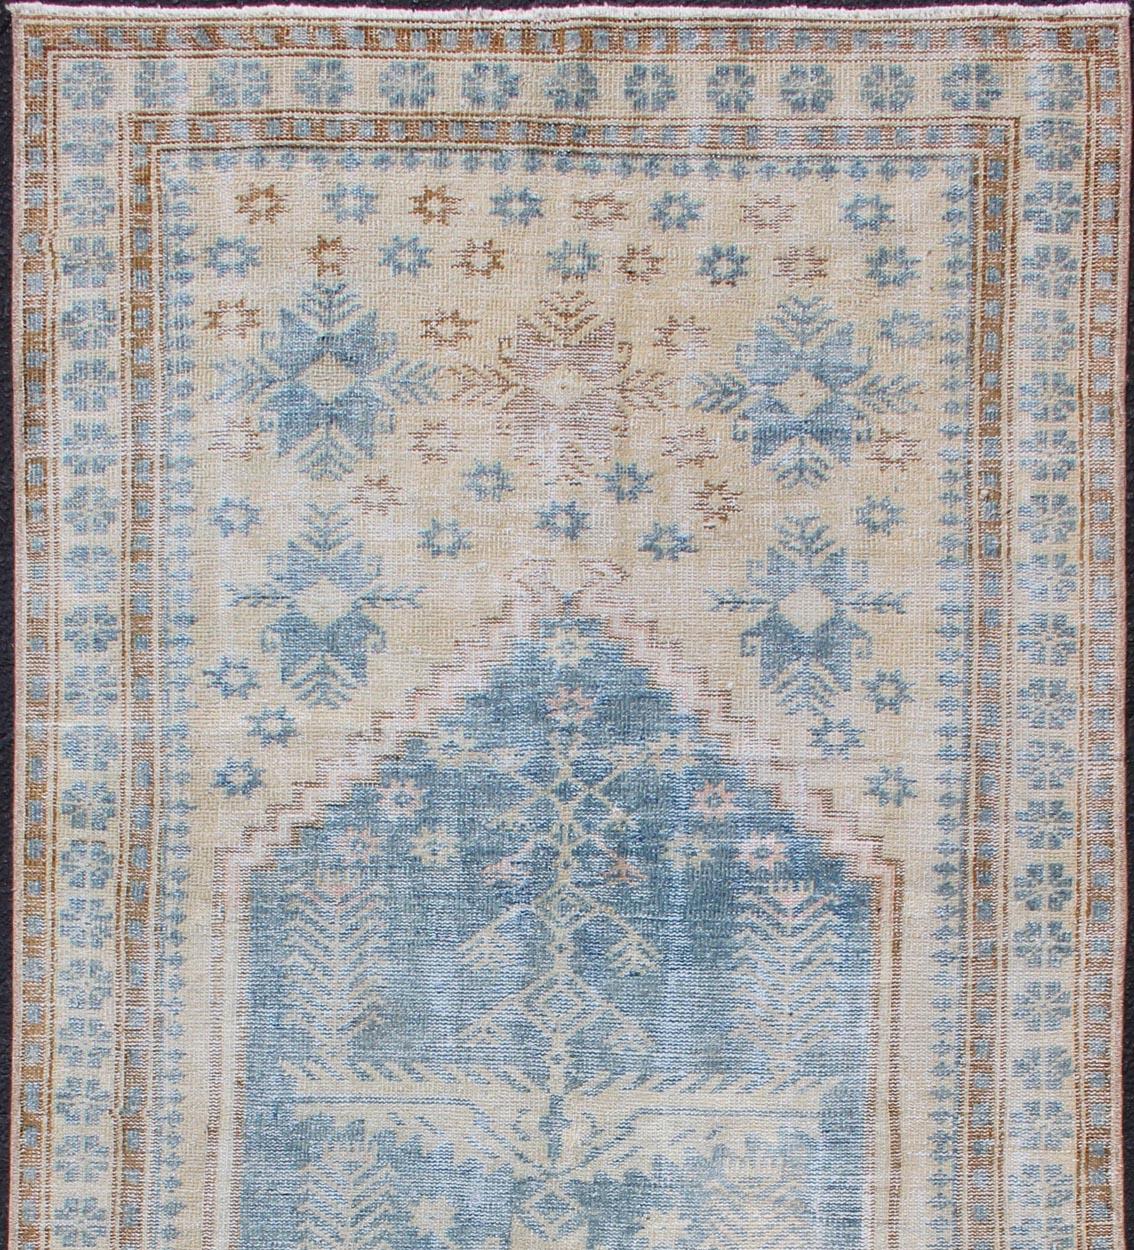 Turkish Medallion Design Persian  antique Rug with Tribal Design in Blue and Butter